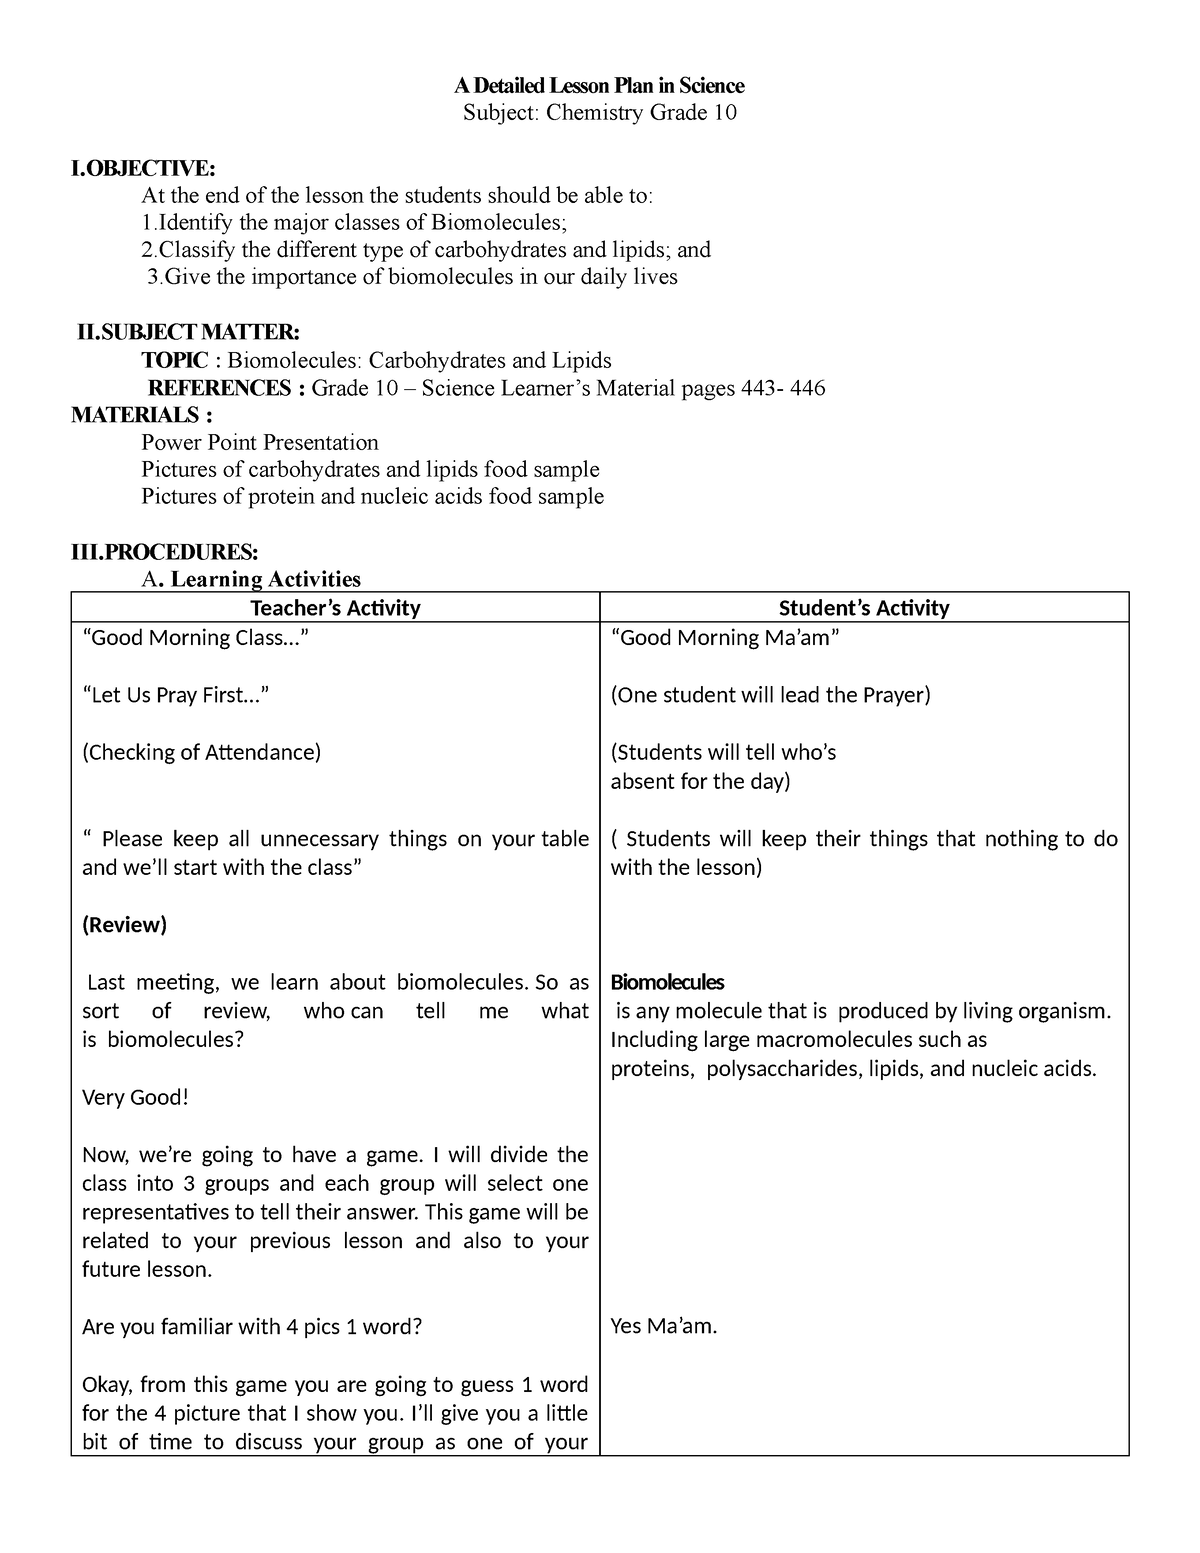 A-Detailed-Lesson-Plan-in-Science - A Detailed Lesson Plan in Science ...